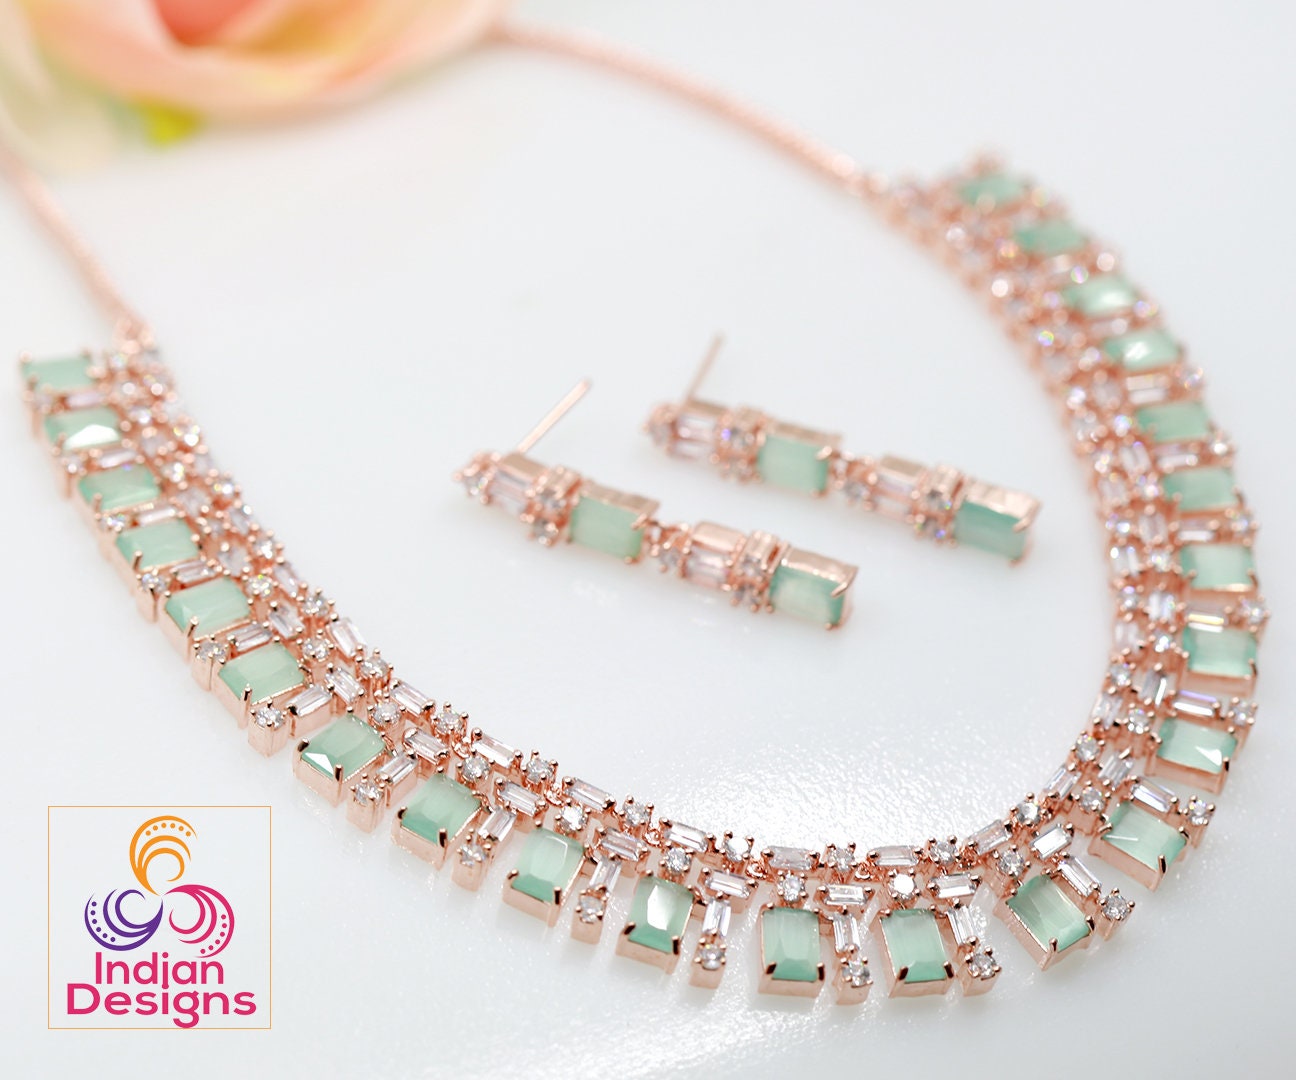 American diamond rose gold Necklace Earring set | Indian designs jewellery | Cubic zirconia Emerald Ruby necklace | Gift for girl friend